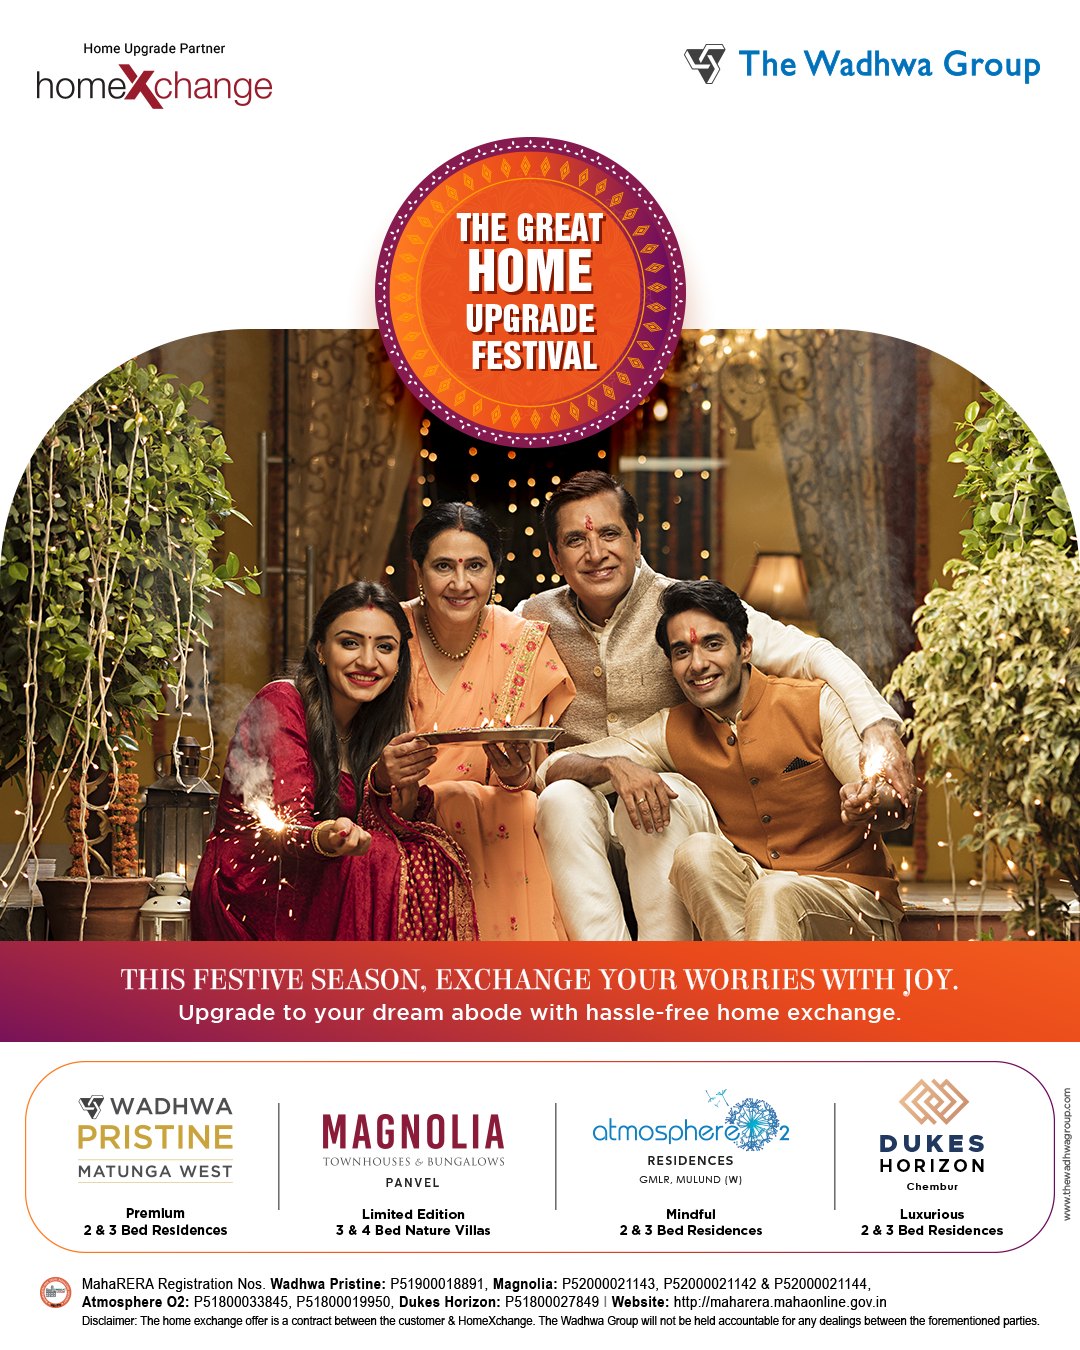 The Wadhwa Group Presents 'The Great Home Upgrade Festival'